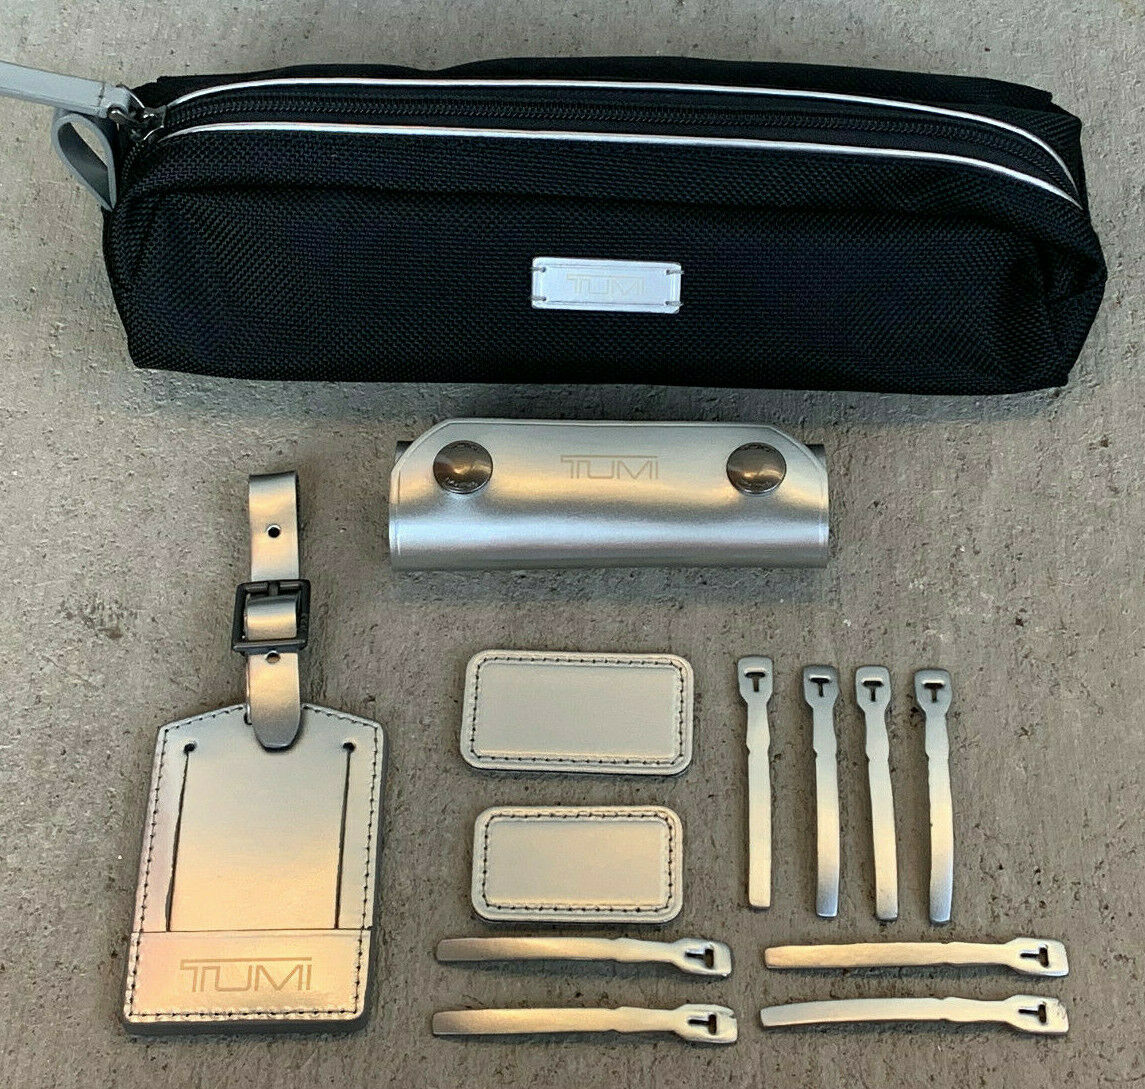 New Tumi Accents Kit In Metallic Silver Zipper Pull Patch And Tag Rare $115 Msrp